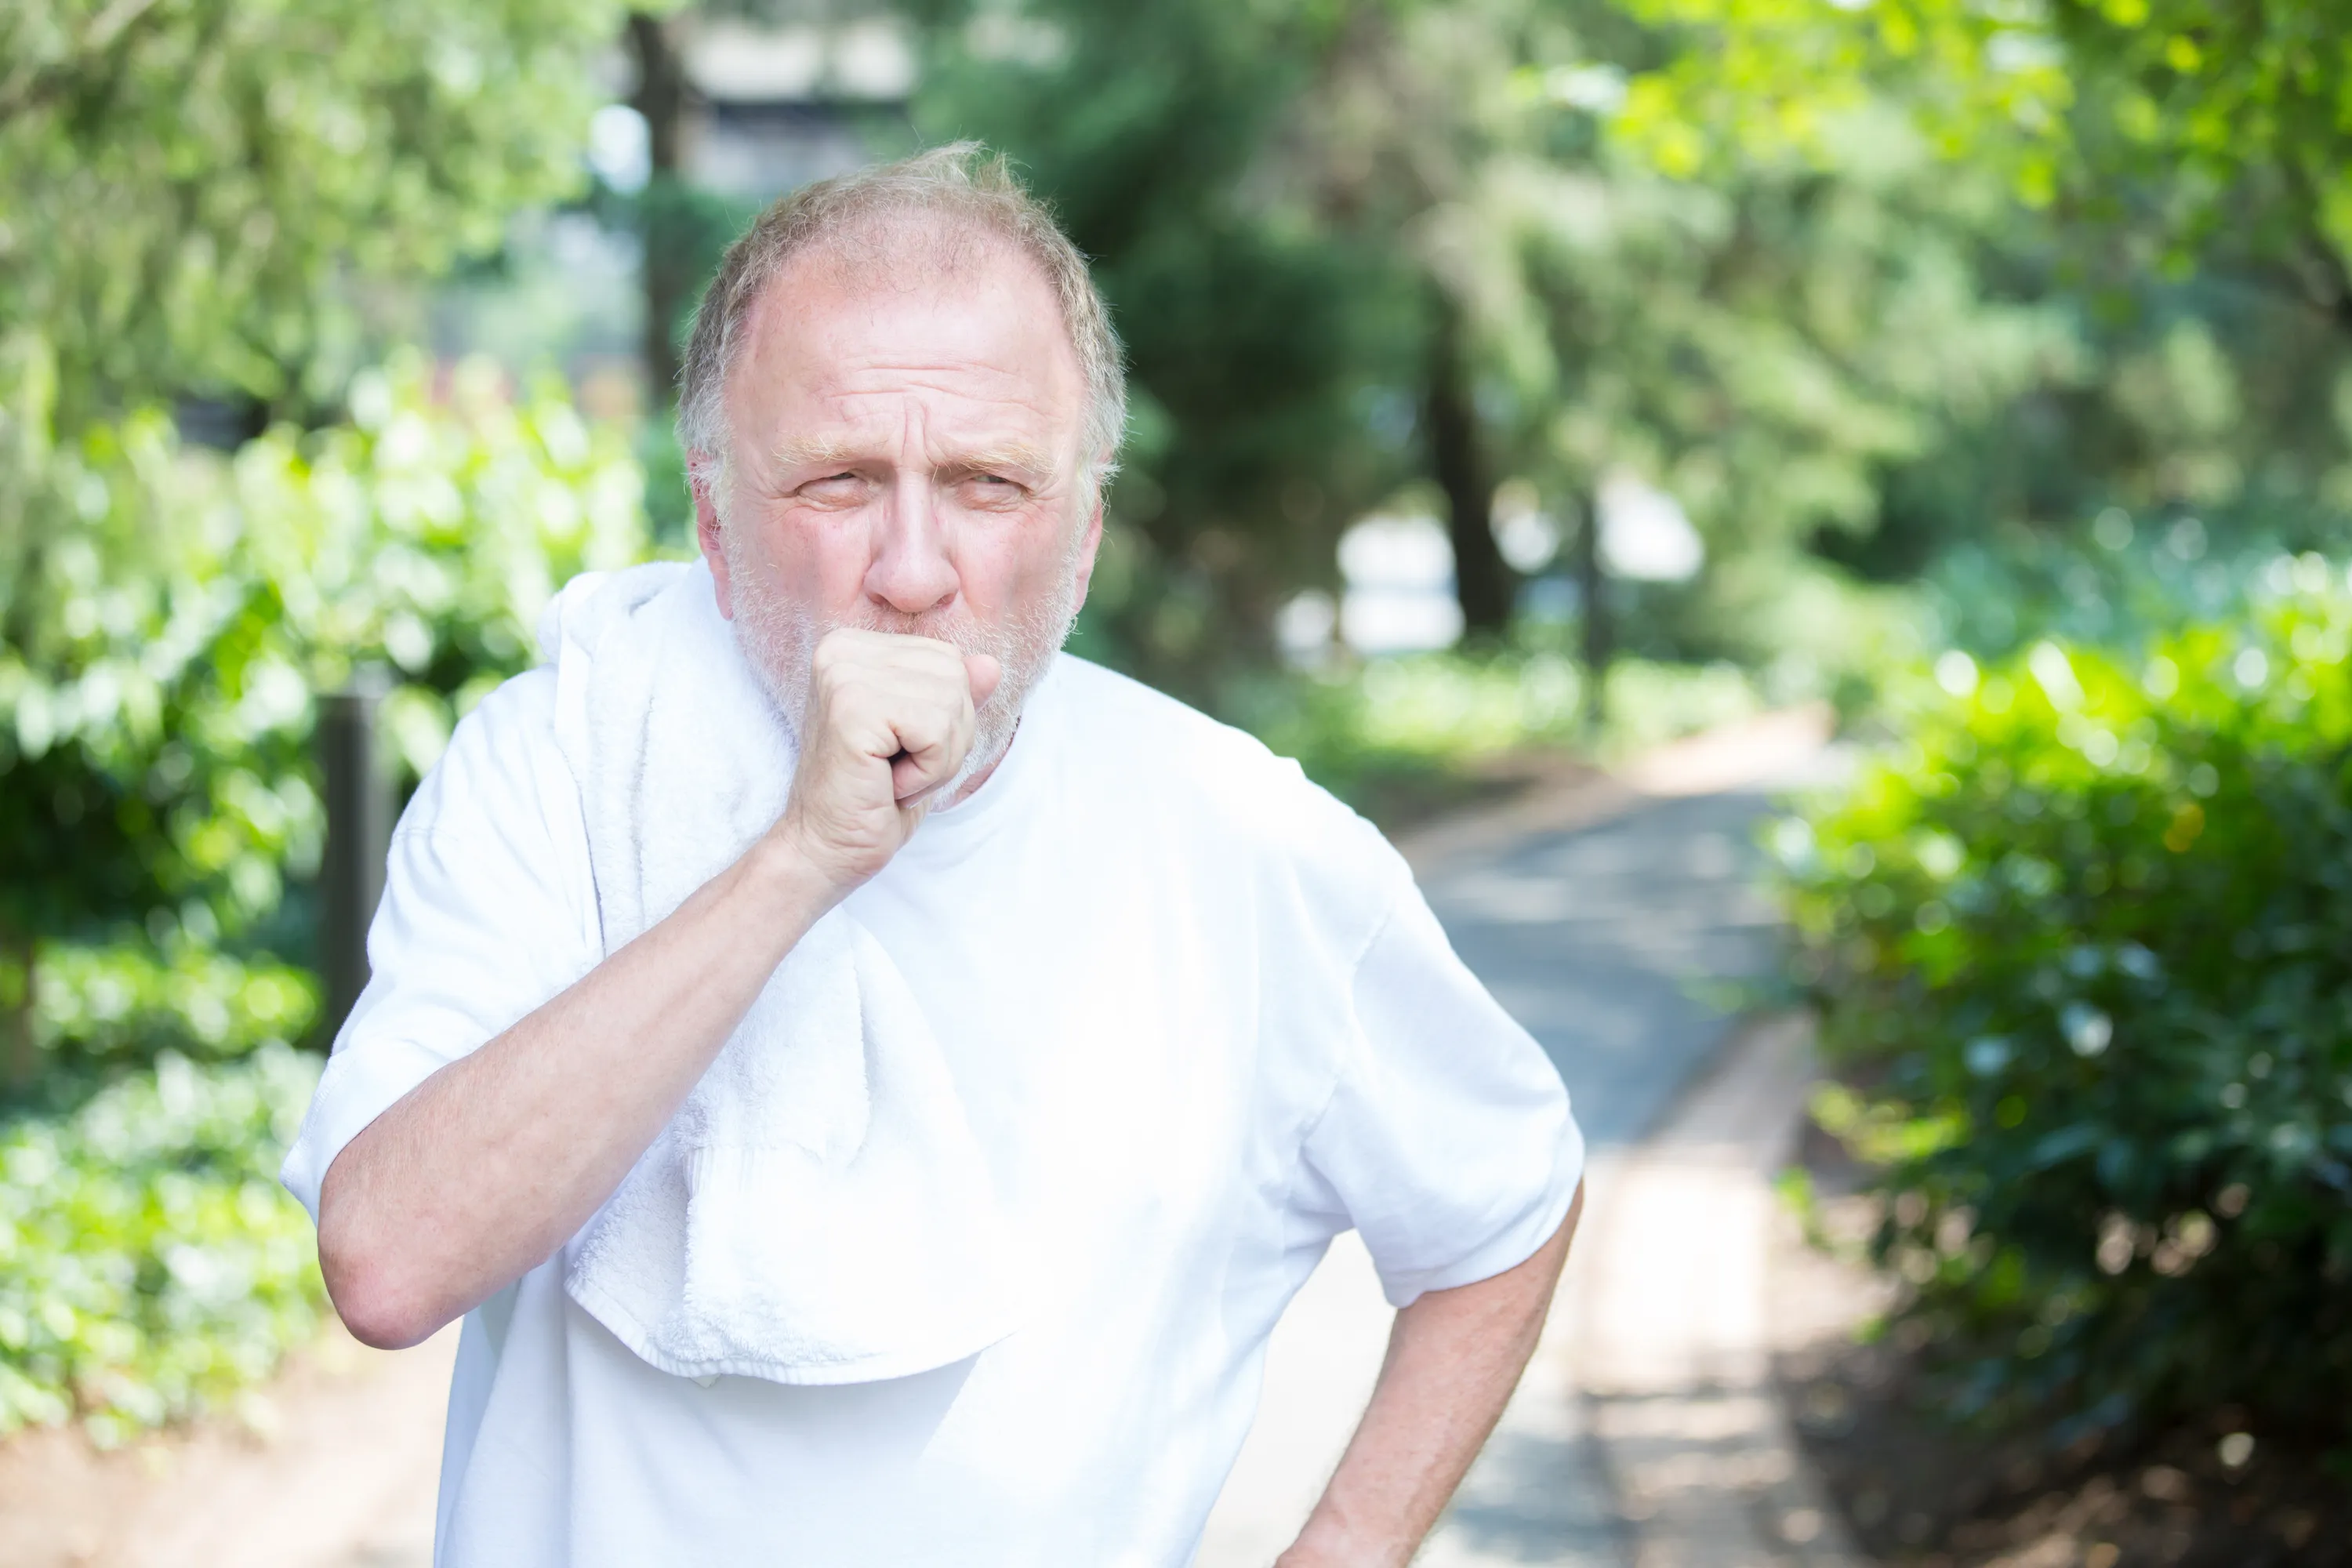 Chronic Obstructive Pulmonary Disease: Stages and Treatments